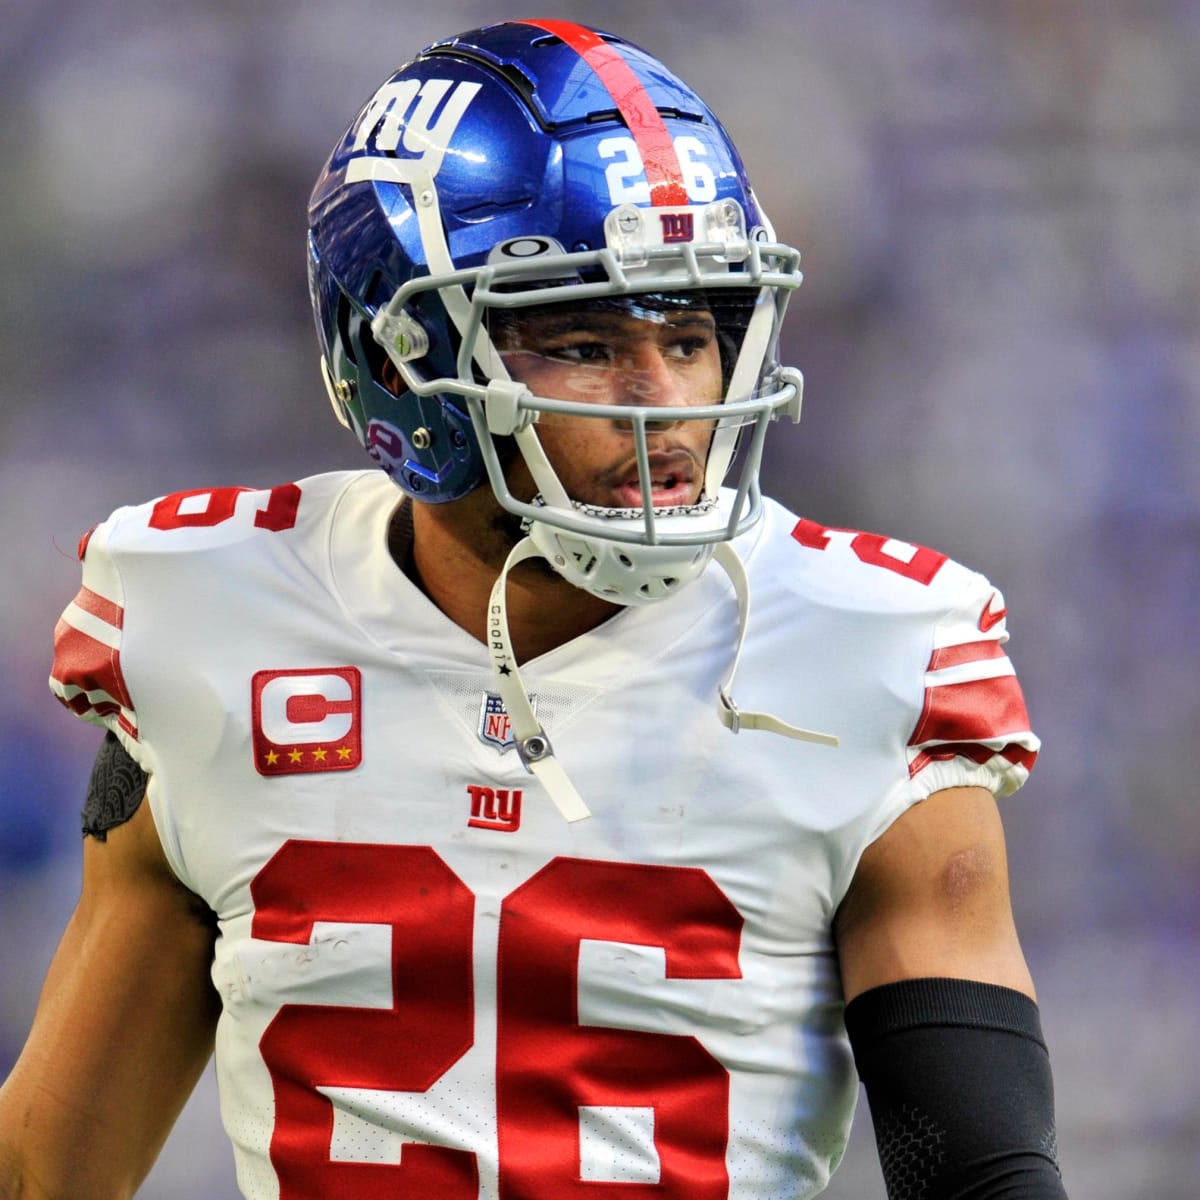 New York Giants running back Saquon Barkley hints there is more to come  after Green Bay win